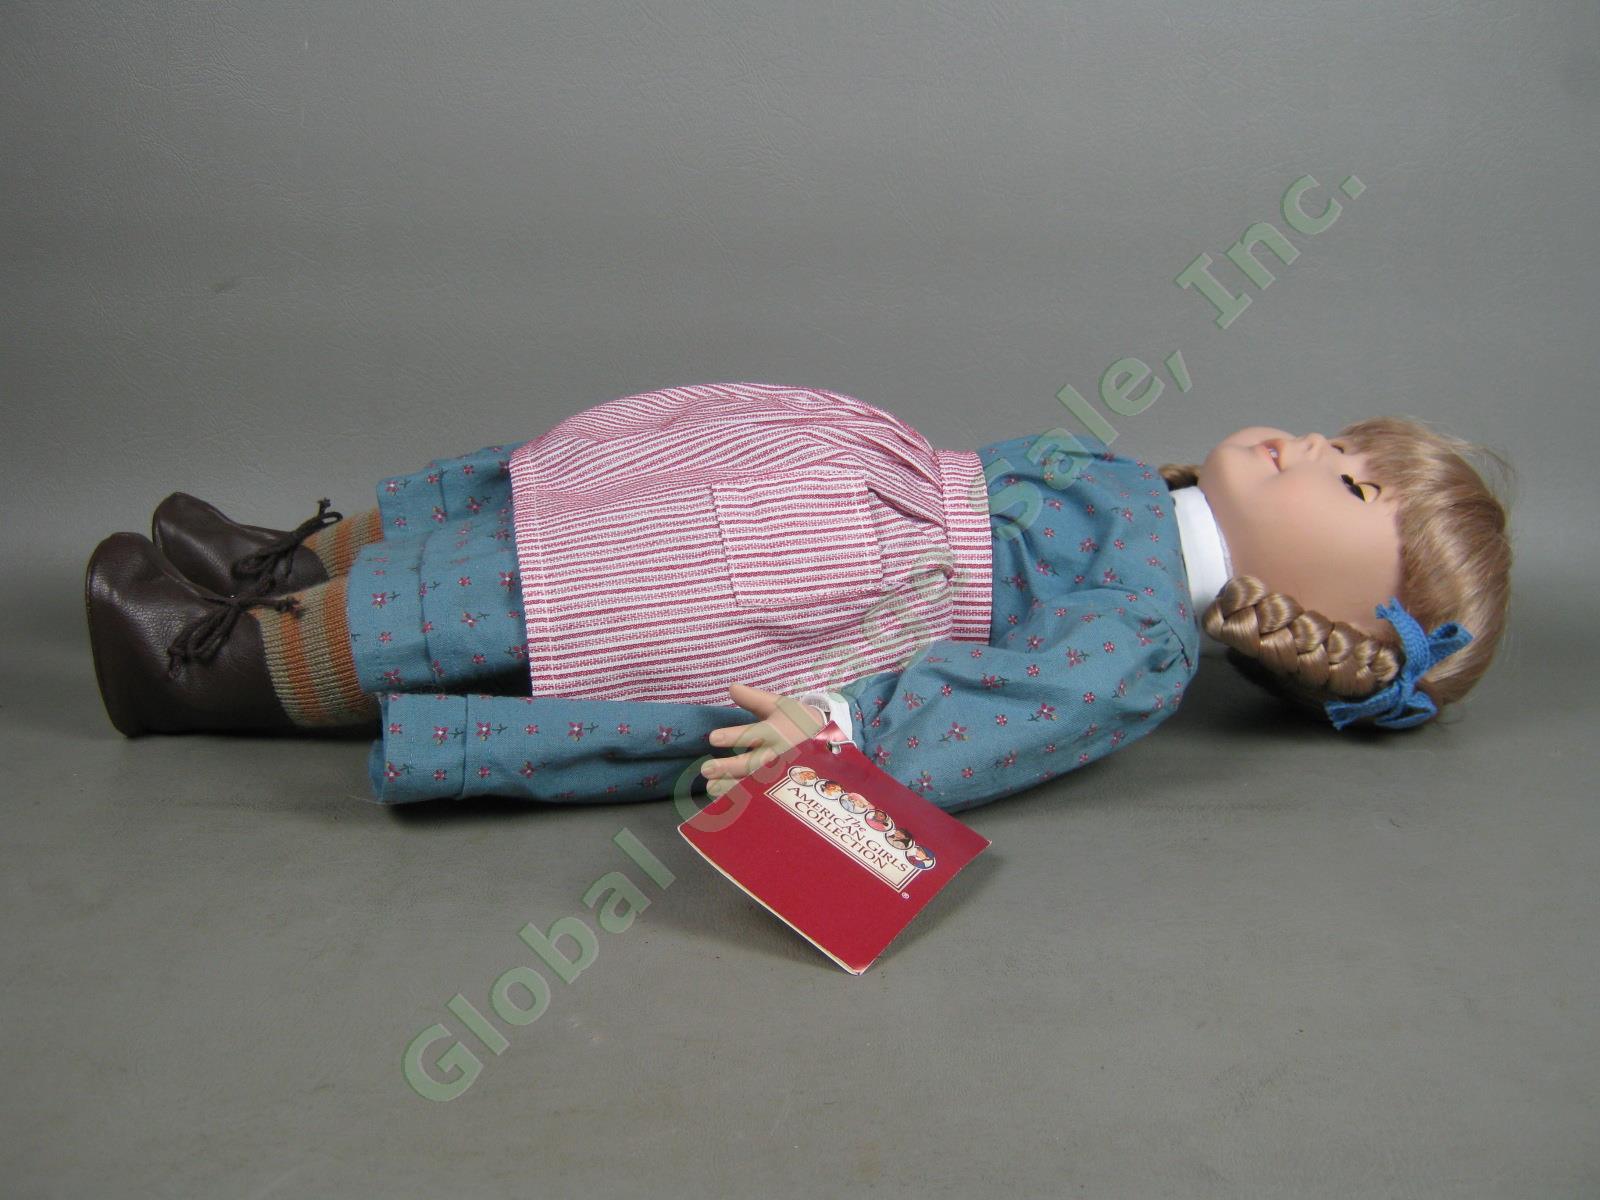 Vintage American Girl 18" Kirsten Doll Pleasant Company Christmas 1994 Exc Cond! 8